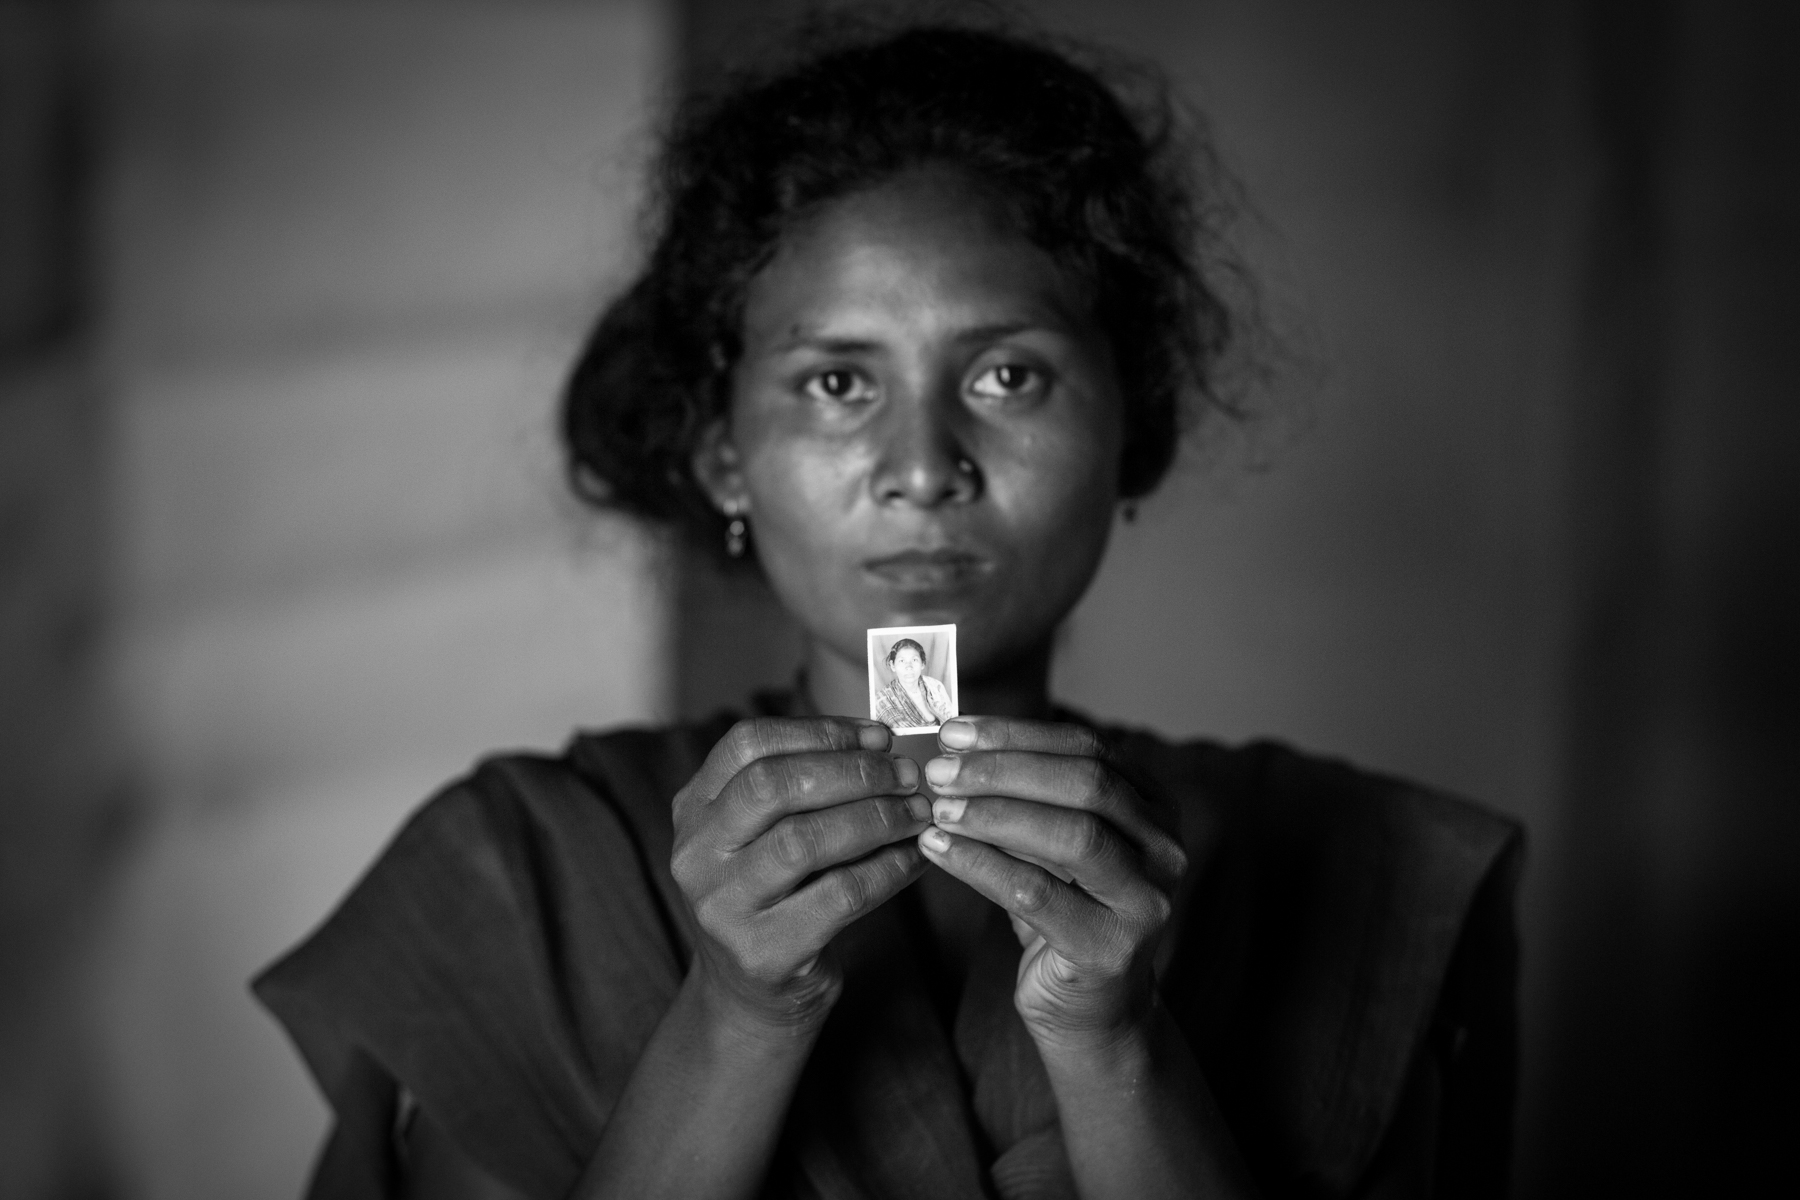 Sunkesi Chaudhary shows a photo of her mother, Parvati Devi Chaudhary, who was beaten to death at midnight on 16 August 2013. She was 45 years old. 24 August 2013, Supauli, Parsa, Nepal.